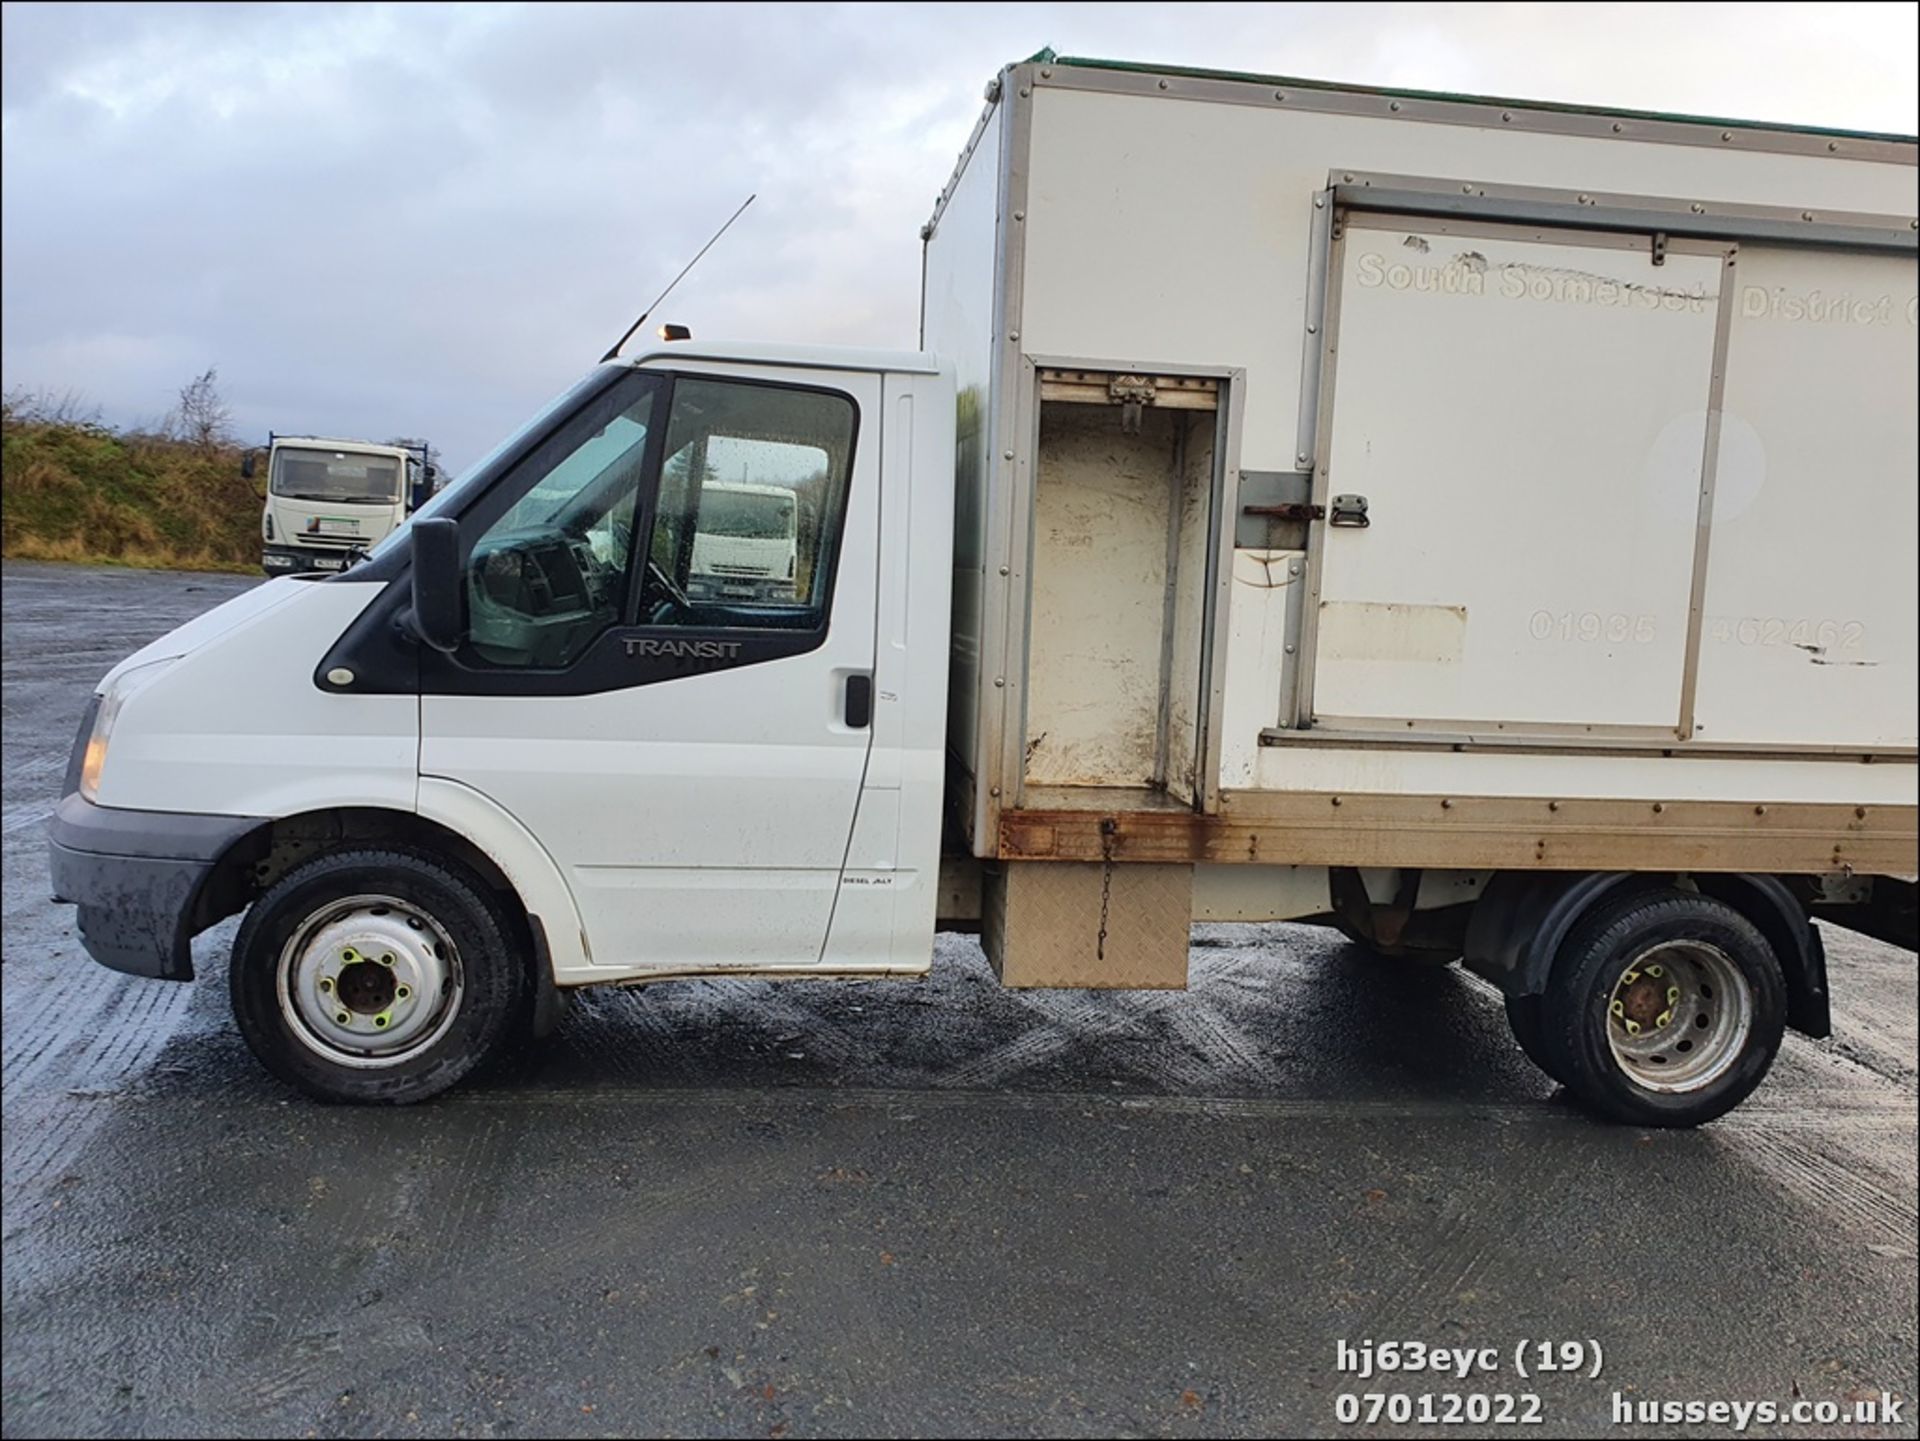 13/63 FORD TRANSIT 100 T350 RWD - 2198cc 3dr Tipper (White, 126k) - Image 21 of 34